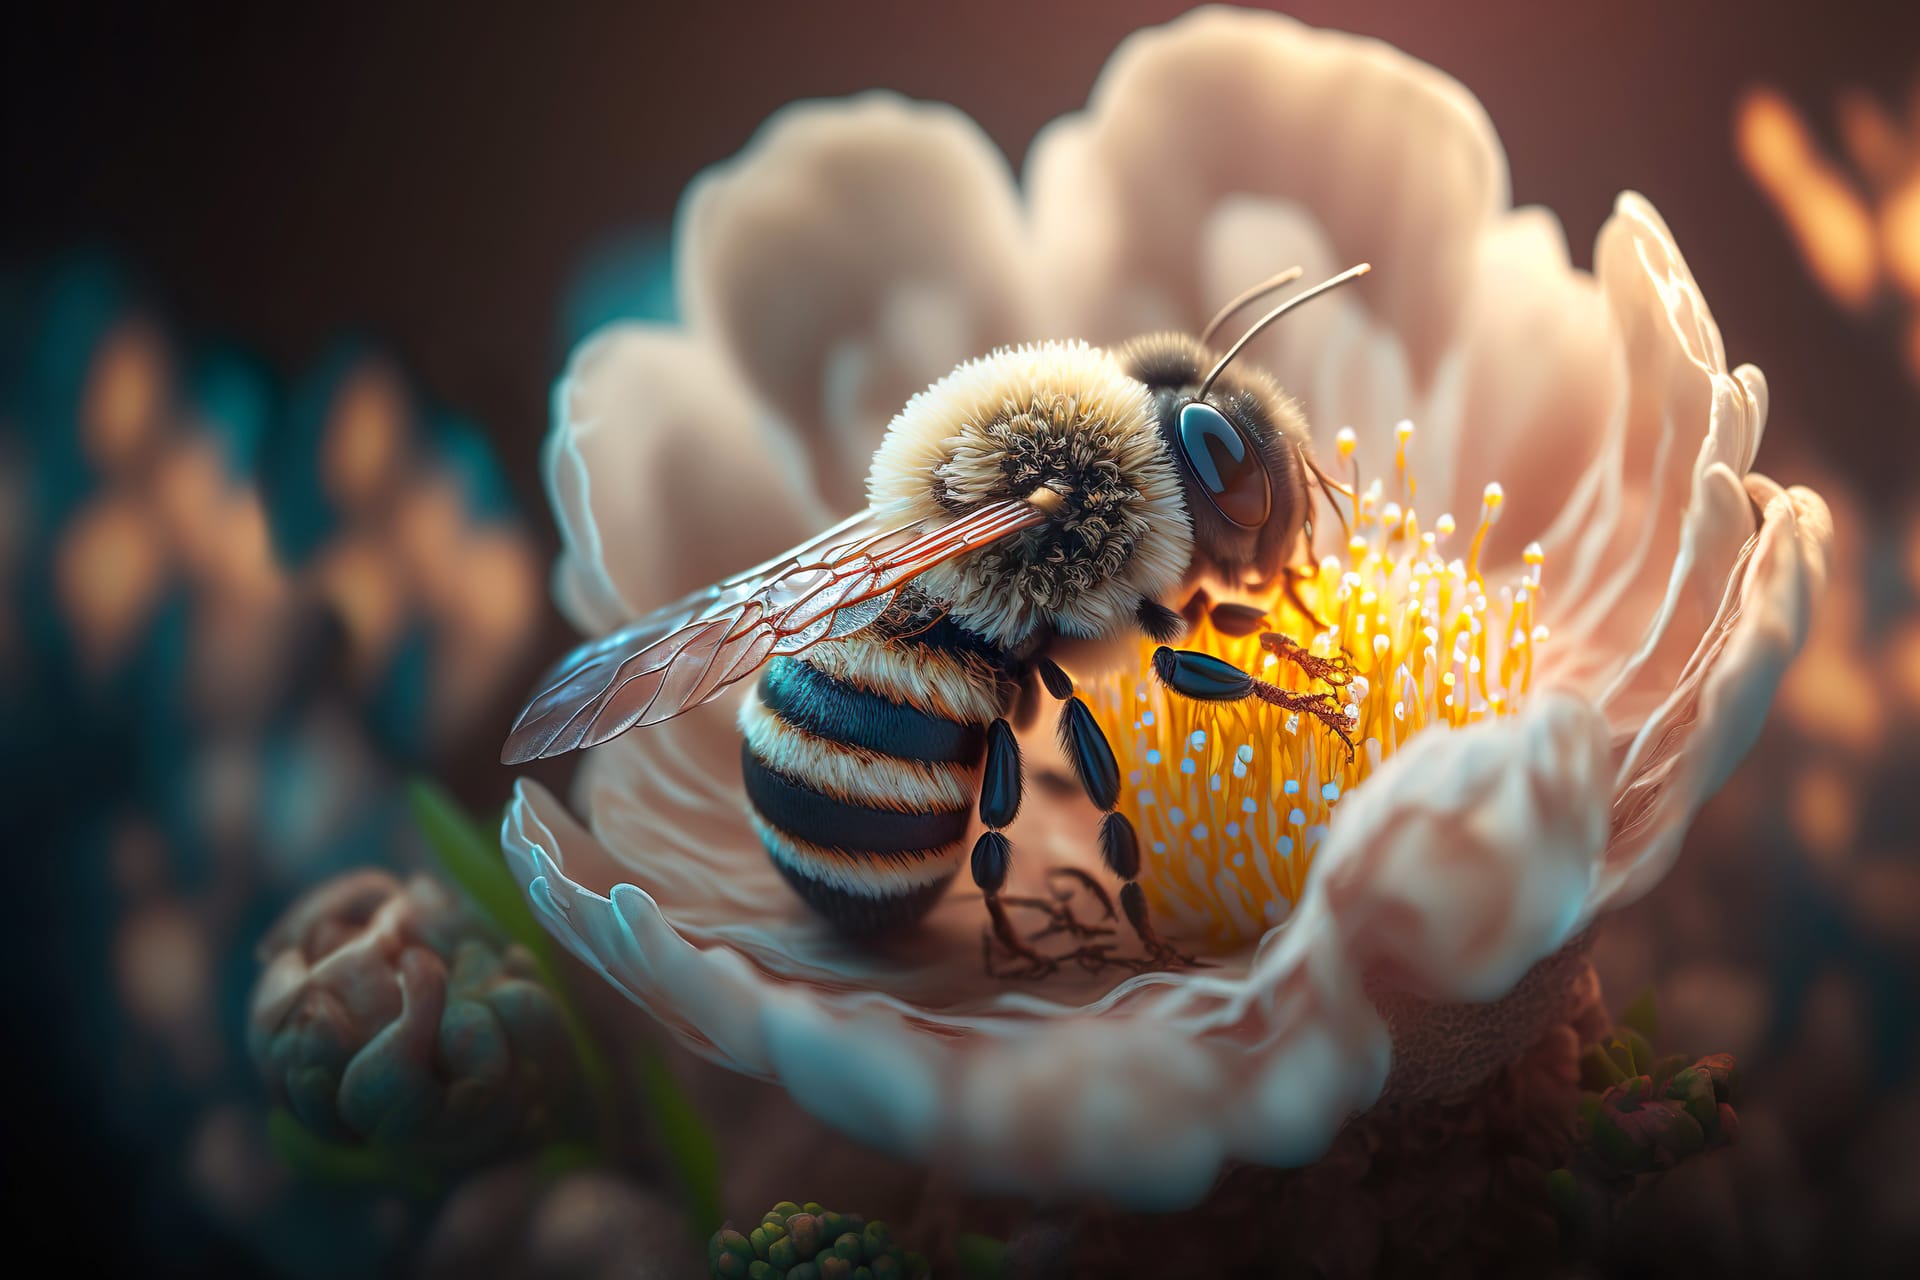 Cute animal profile pictures flower bee illustration